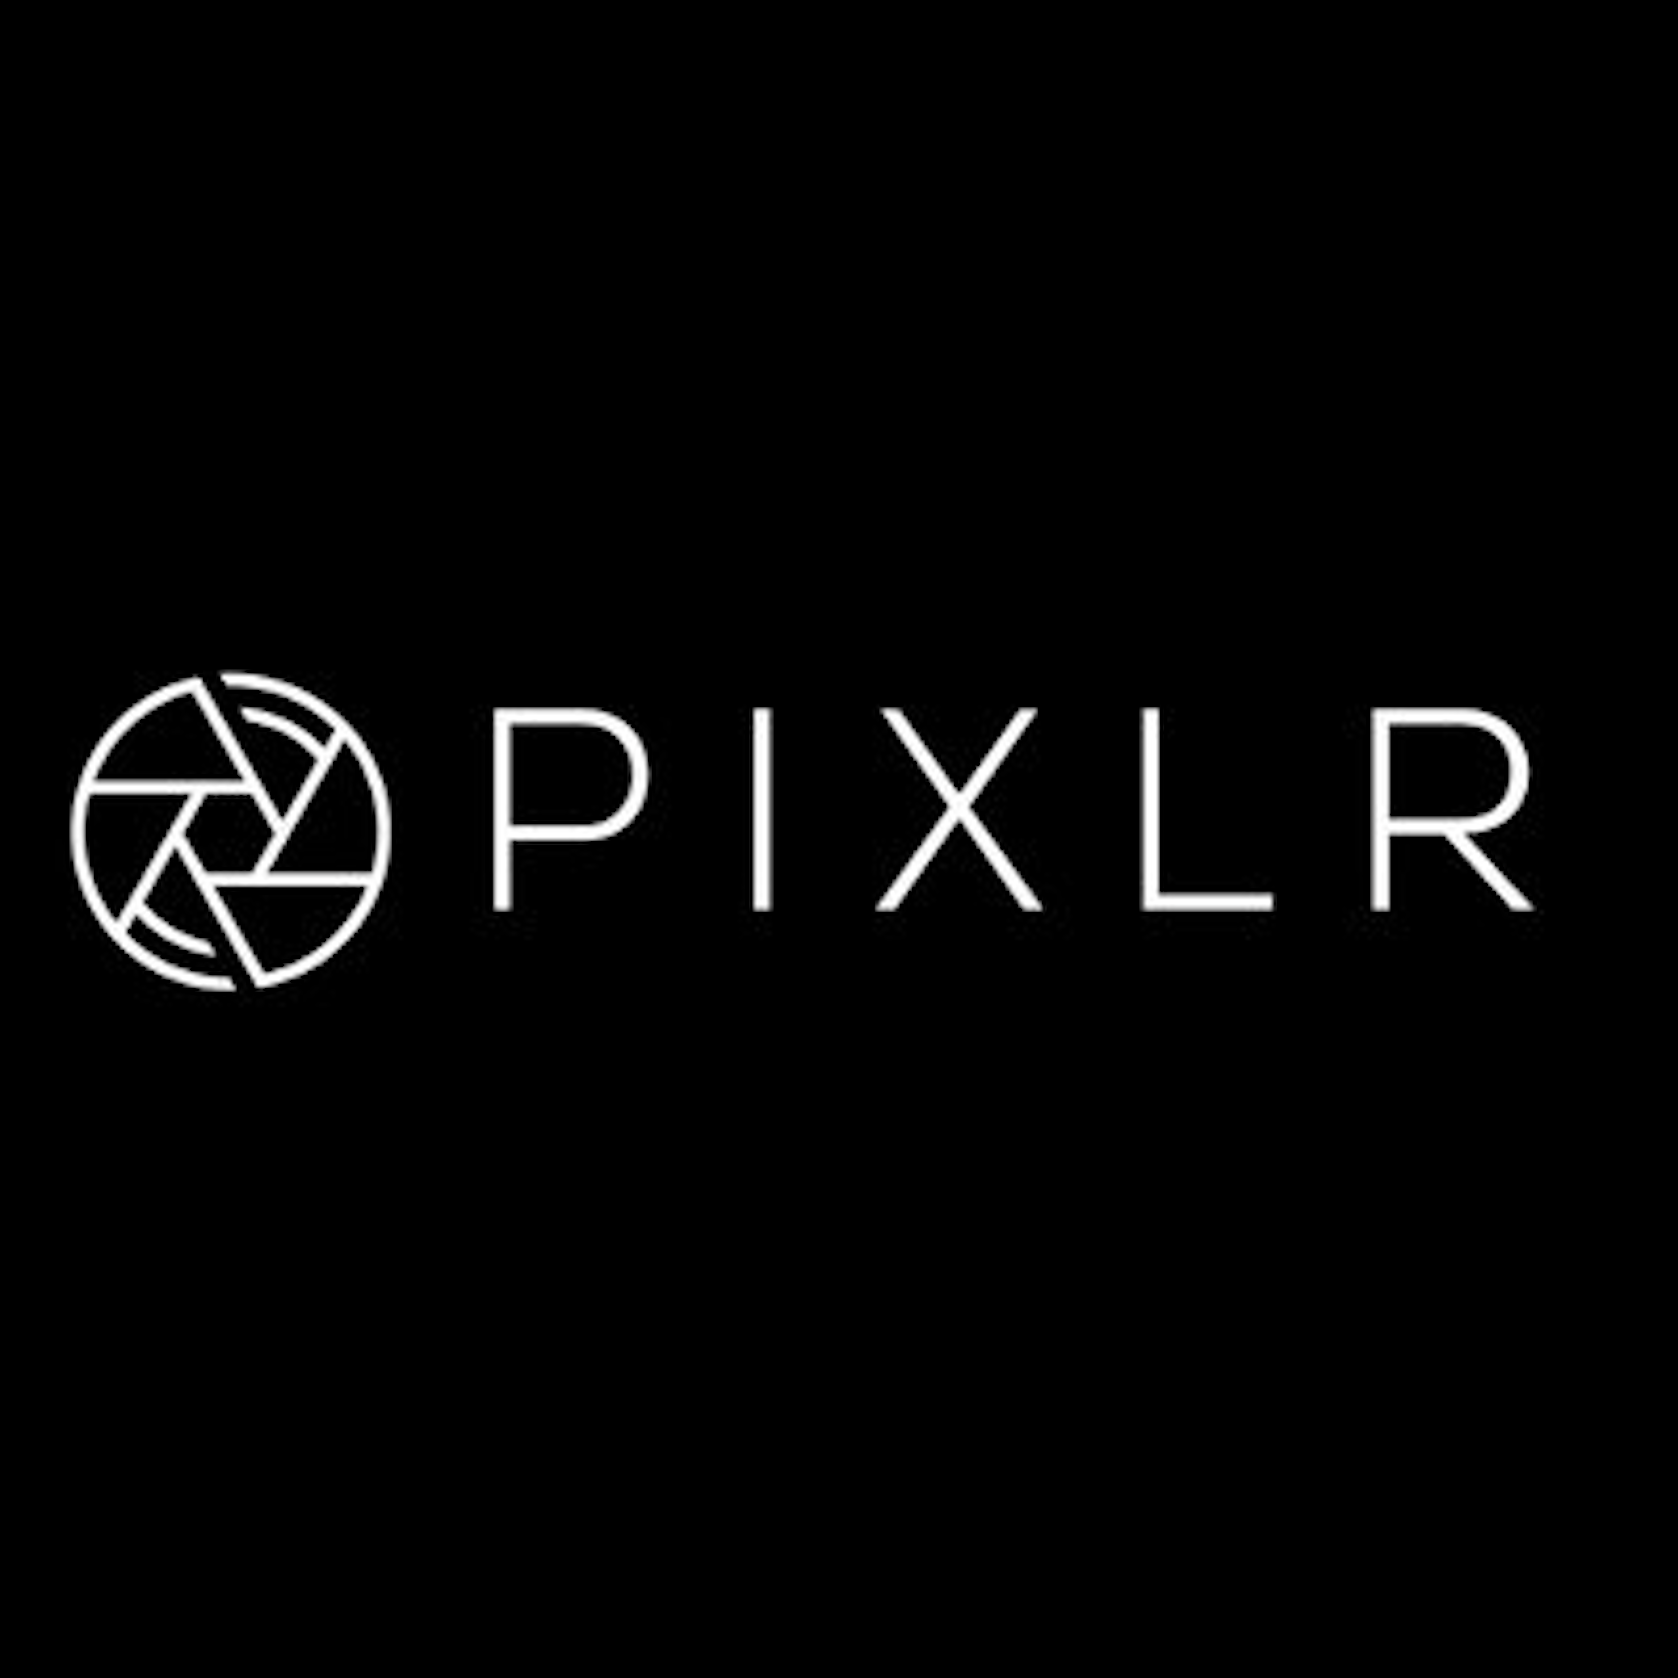 Pixlr launches two user-friendly Mobile Apps -- Pixlr | PRLog